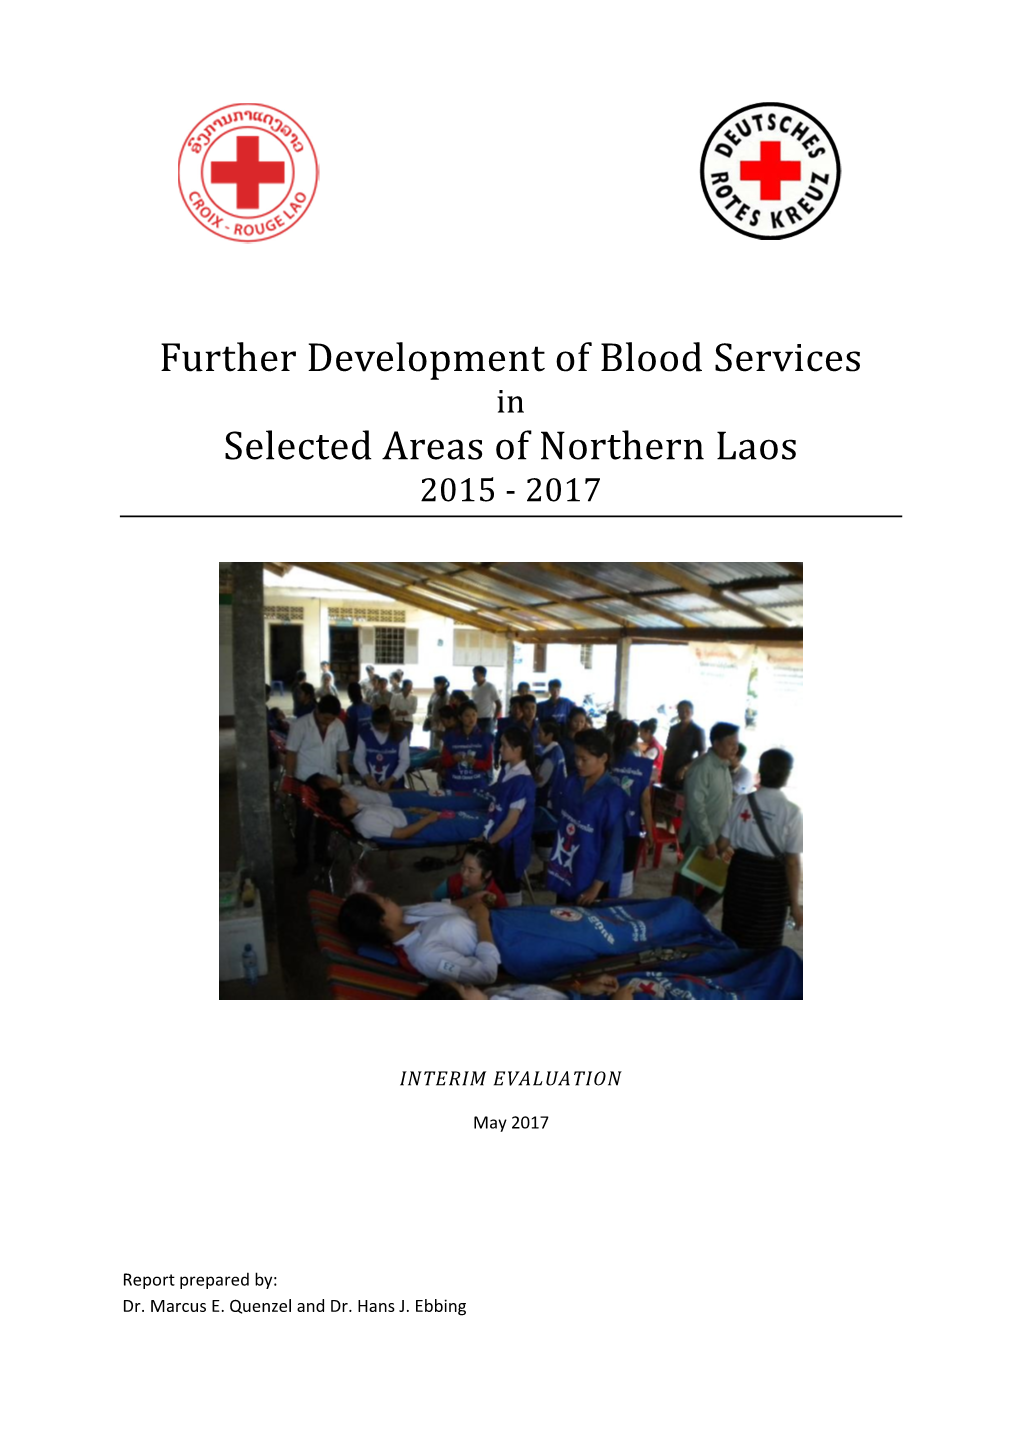 Further Development of Blood Services Selected Areas of Northern Laos